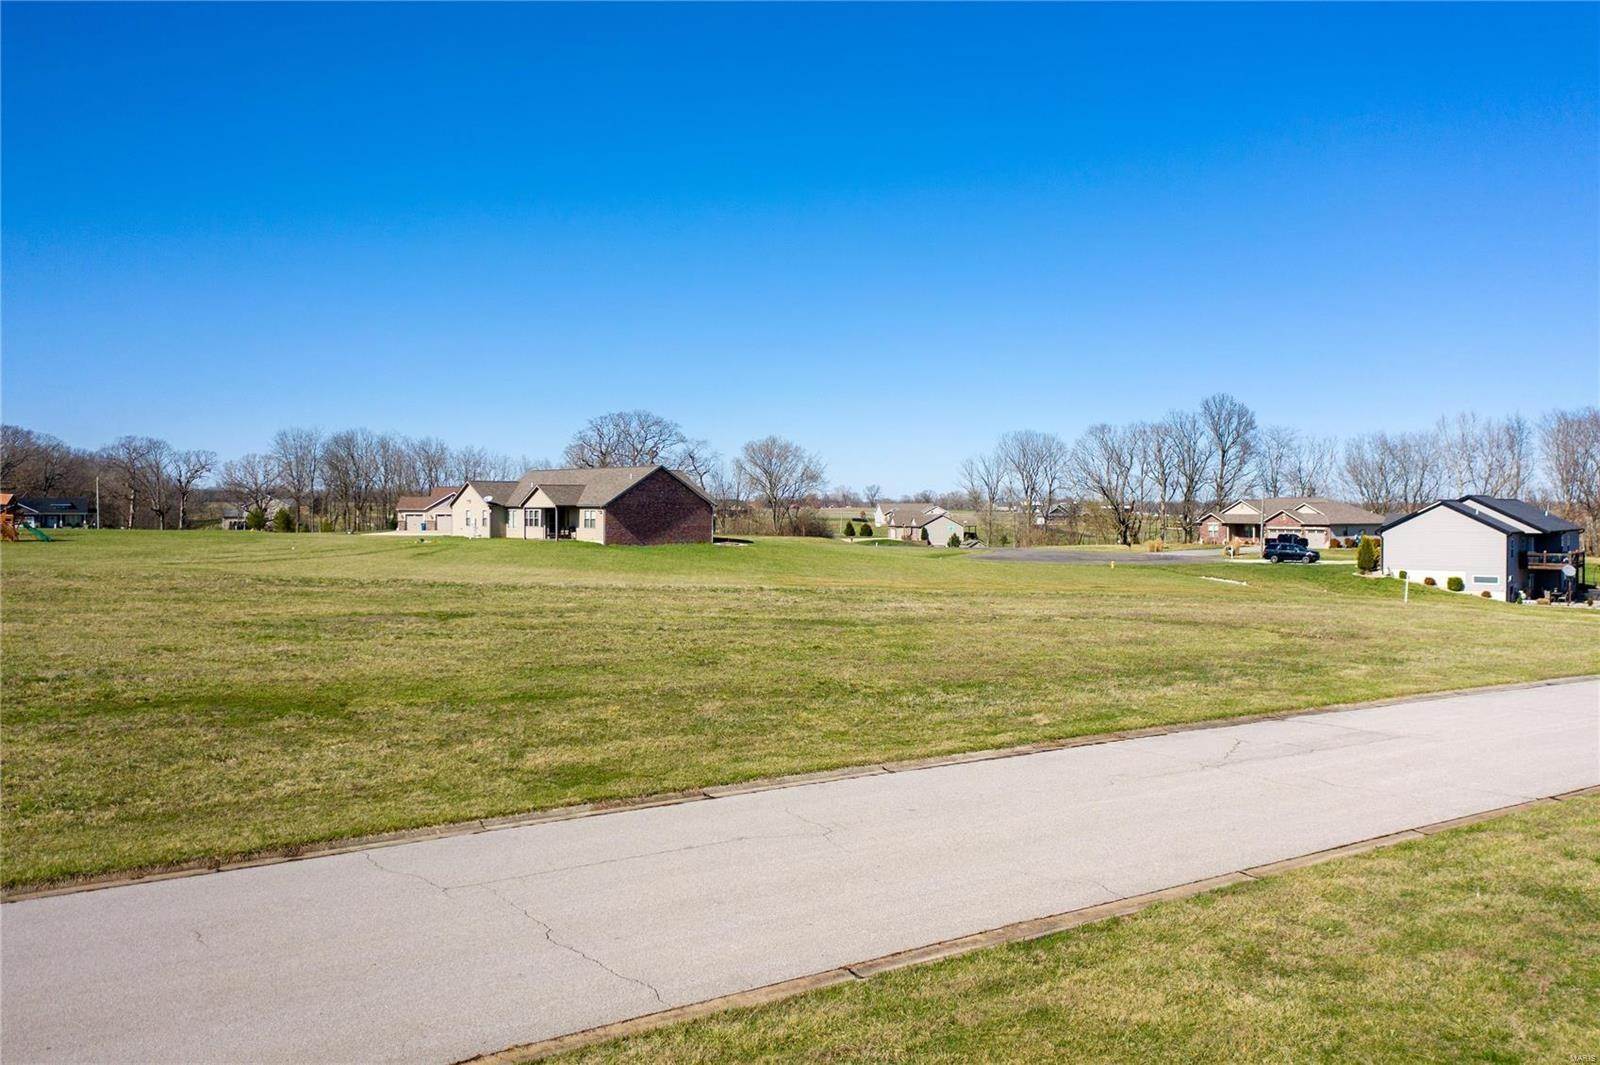 9. Land for Sale at 8645 Aidan Way Troy, Illinois 62294 United States